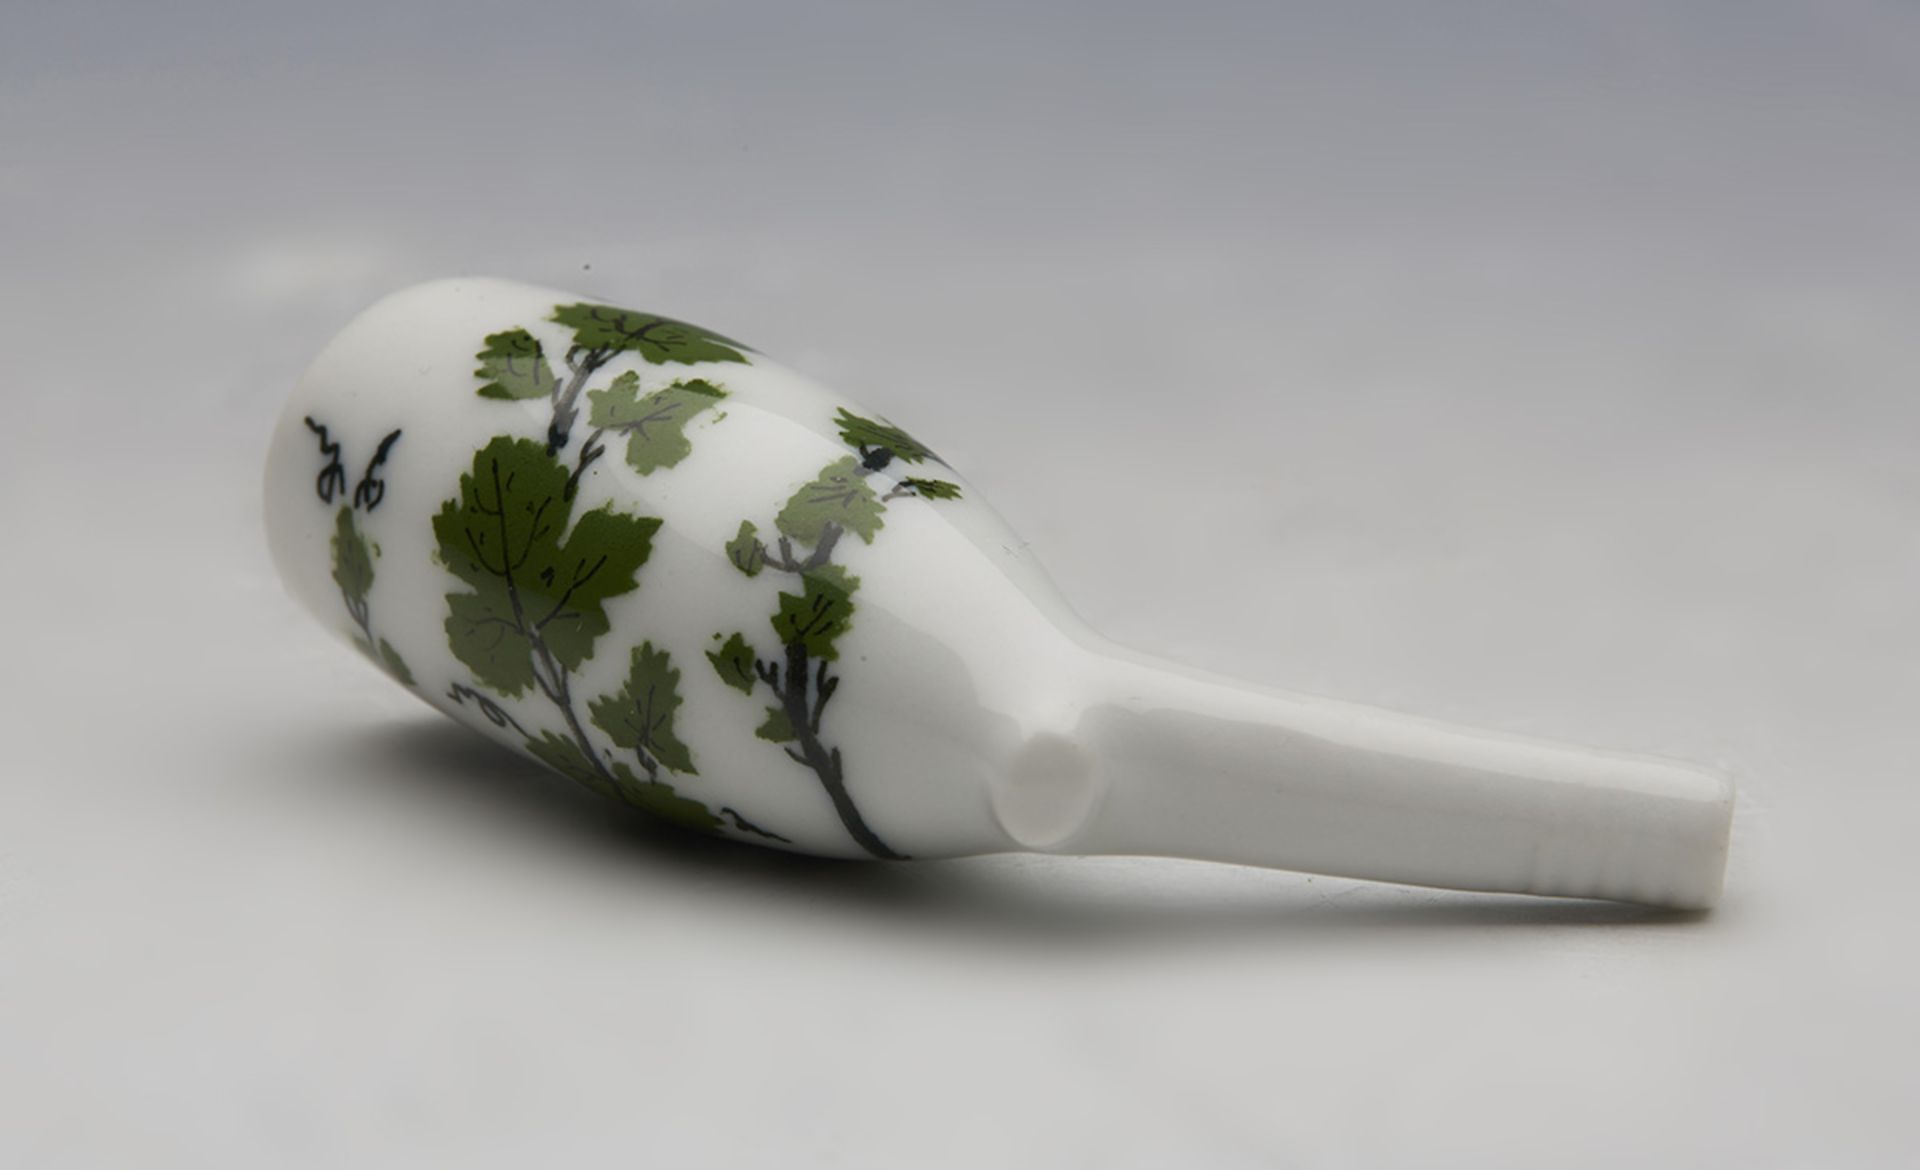 Antique German Meissen Porcelain Pipe Bowl With Ivy 19Th C. - Image 4 of 5